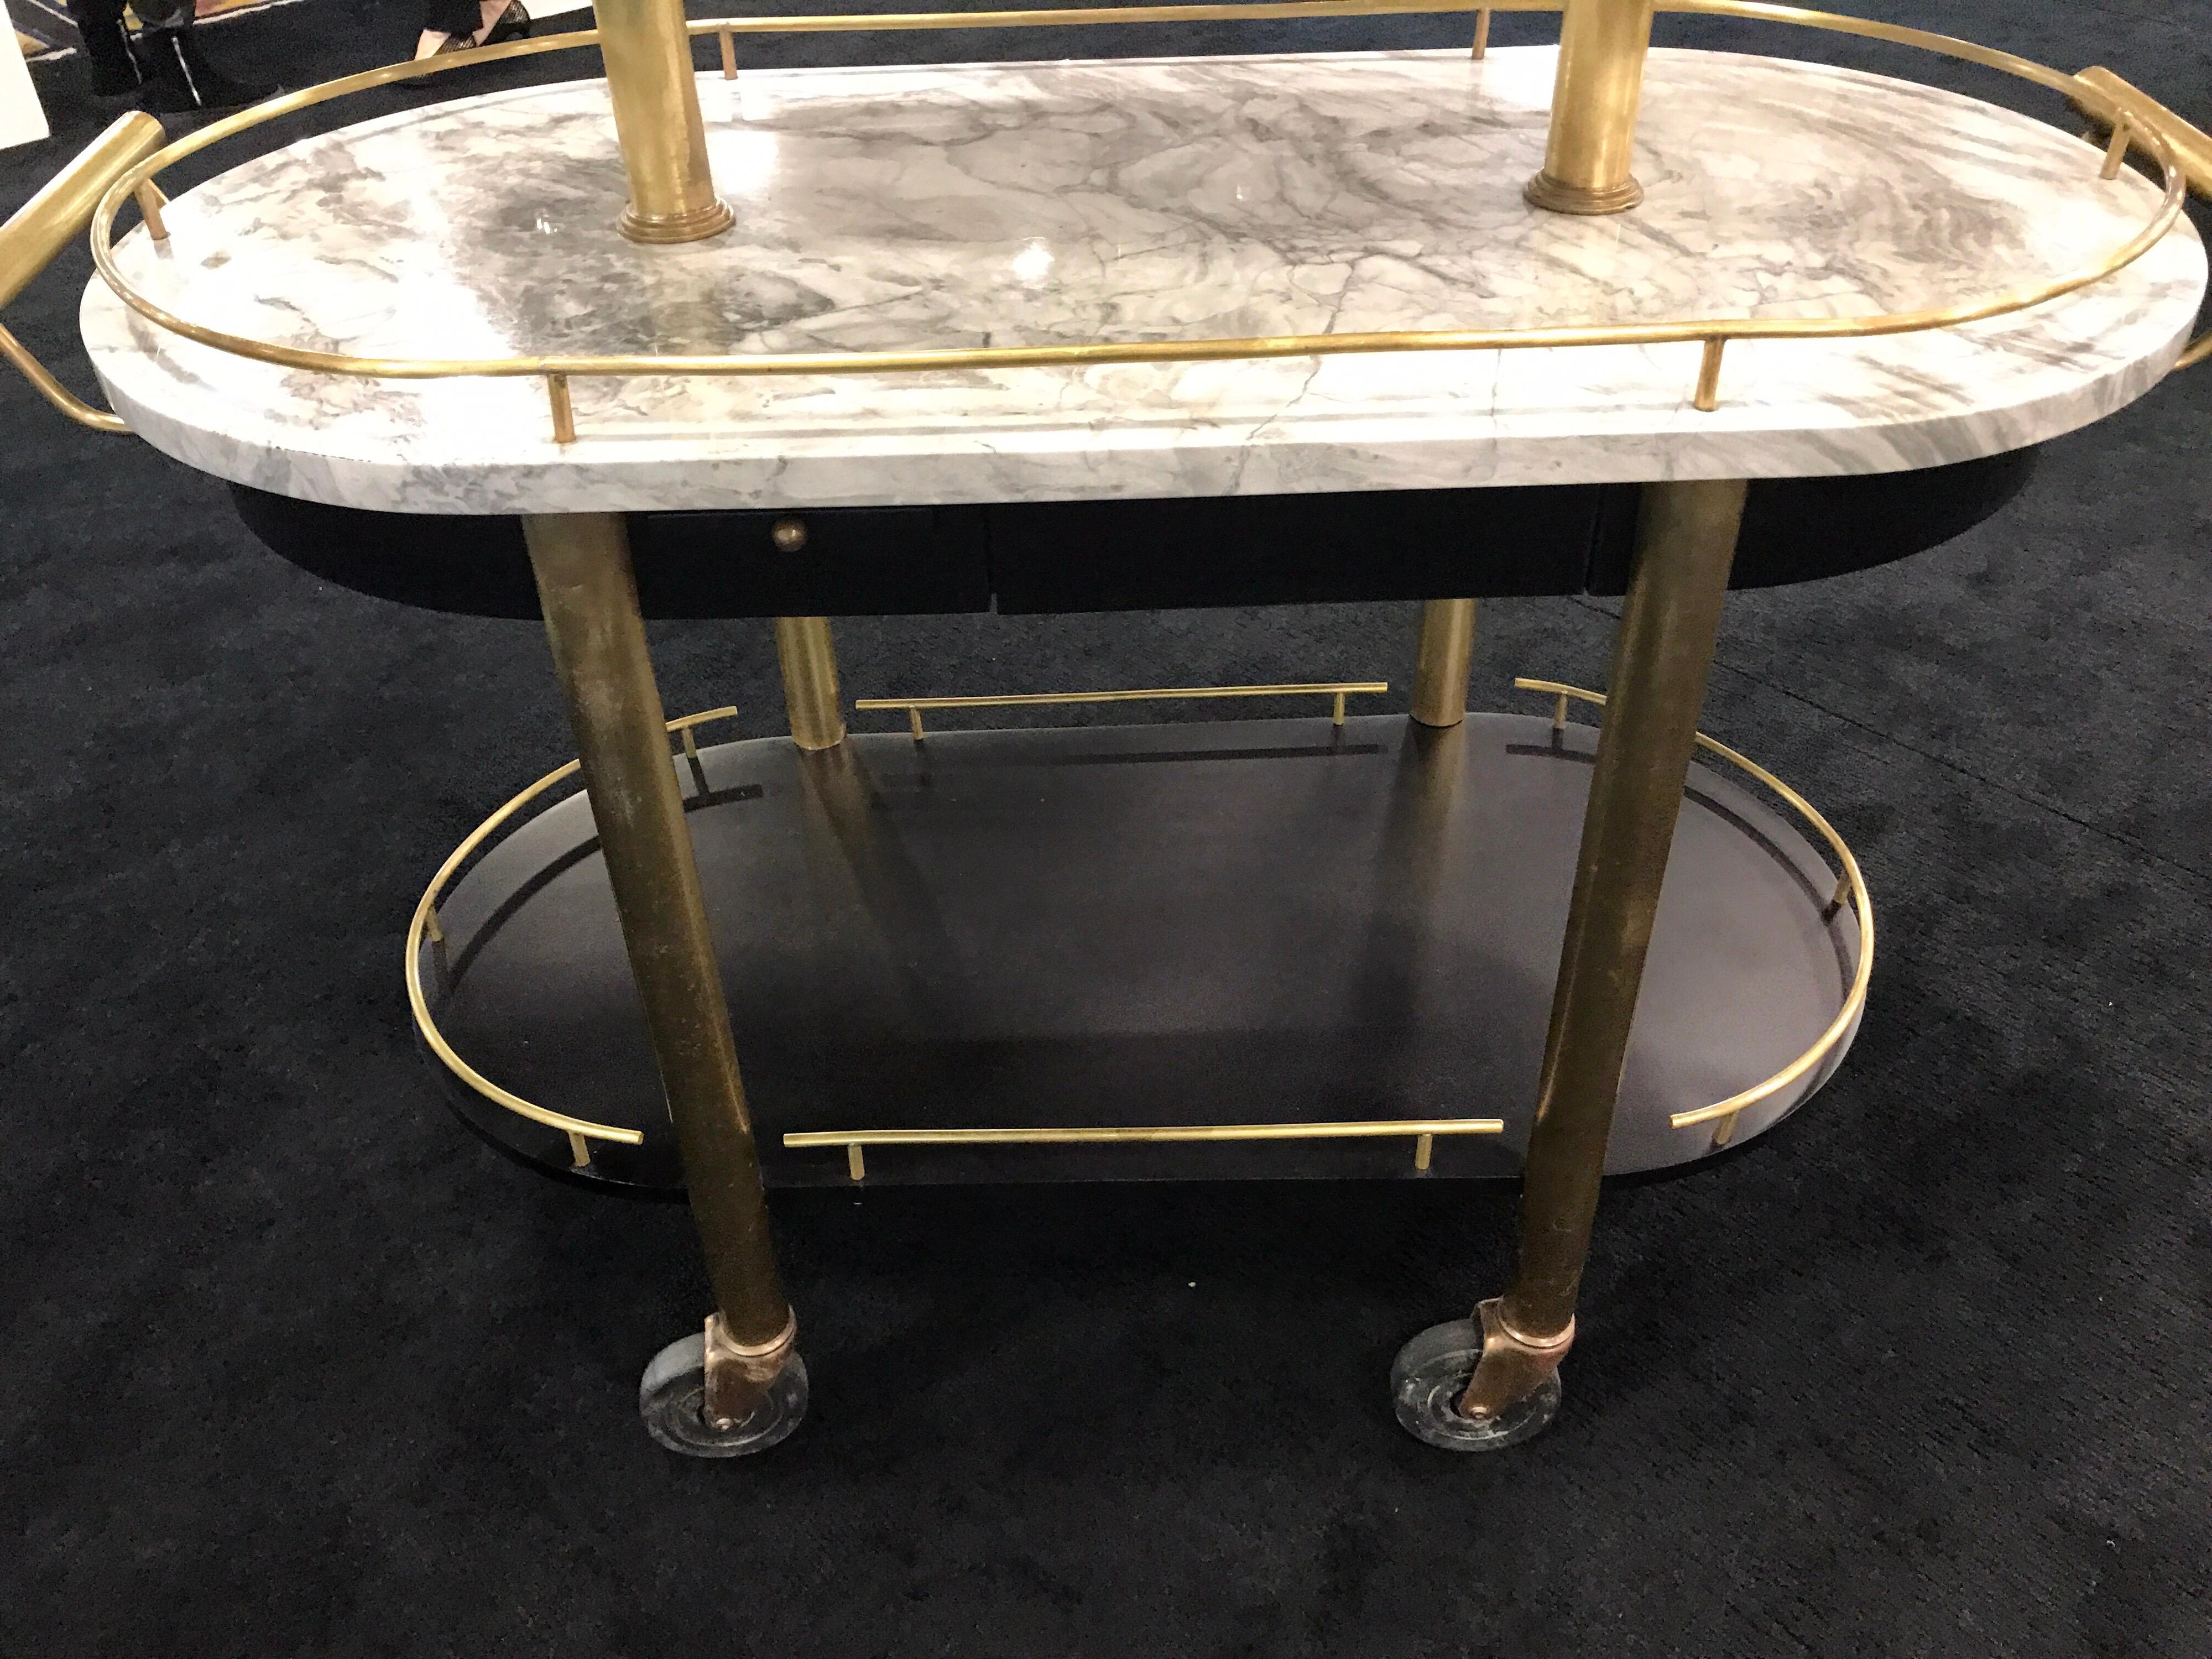 French Art Deco three-tier brass and marble Bistro cart, fitted with three brass gallery tiered shelves.
The top marble shelf measures 35